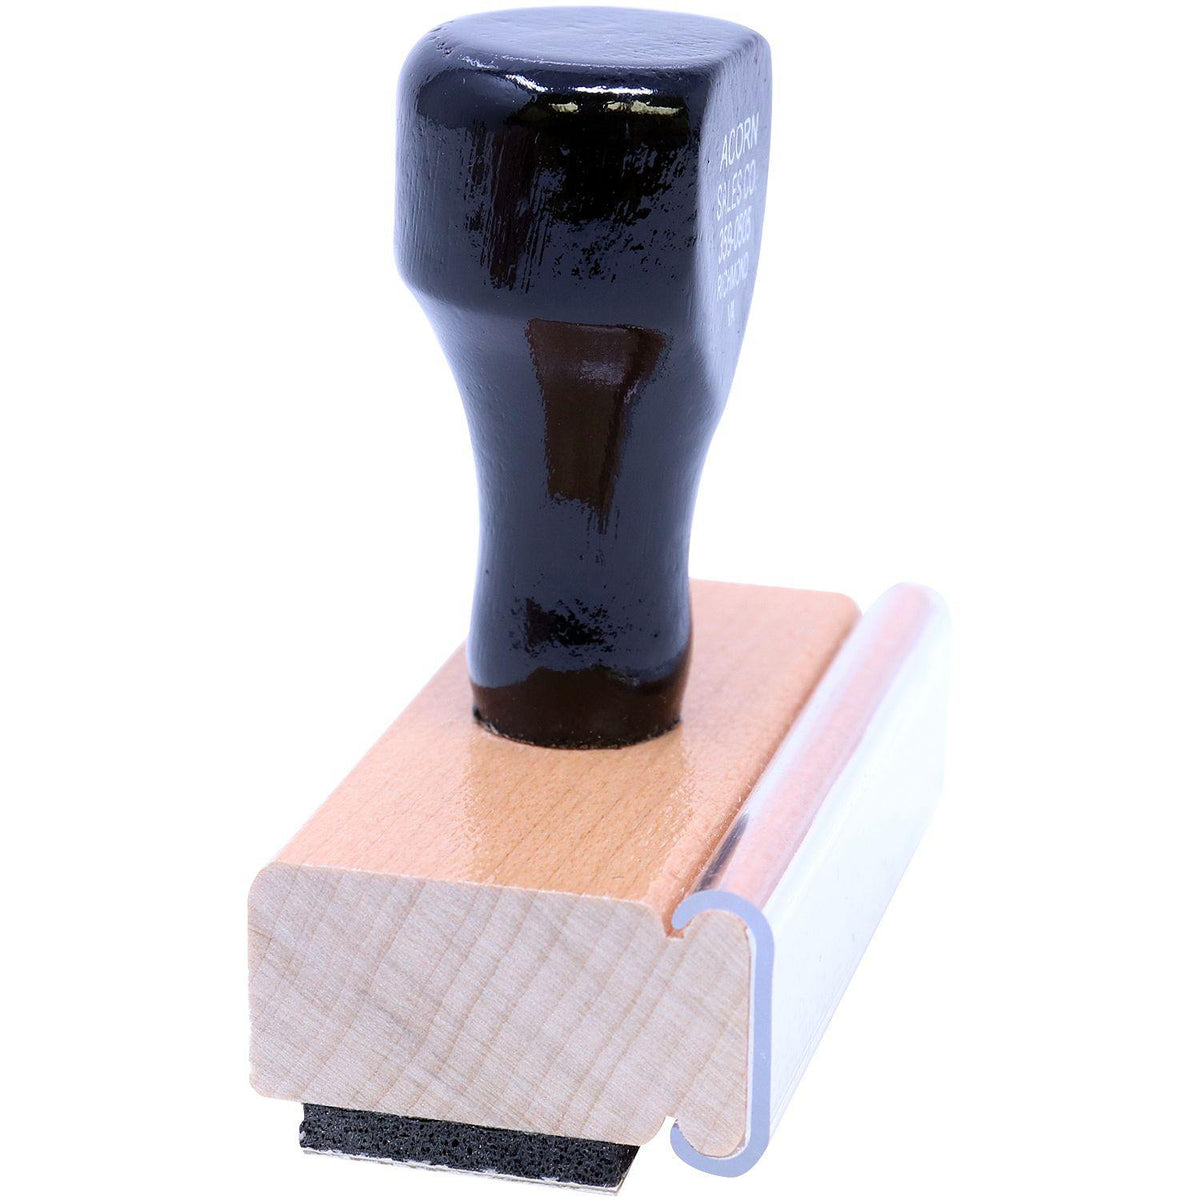 Side View of 1st 2nd Notice Returned Rubber Stamp at an Angle